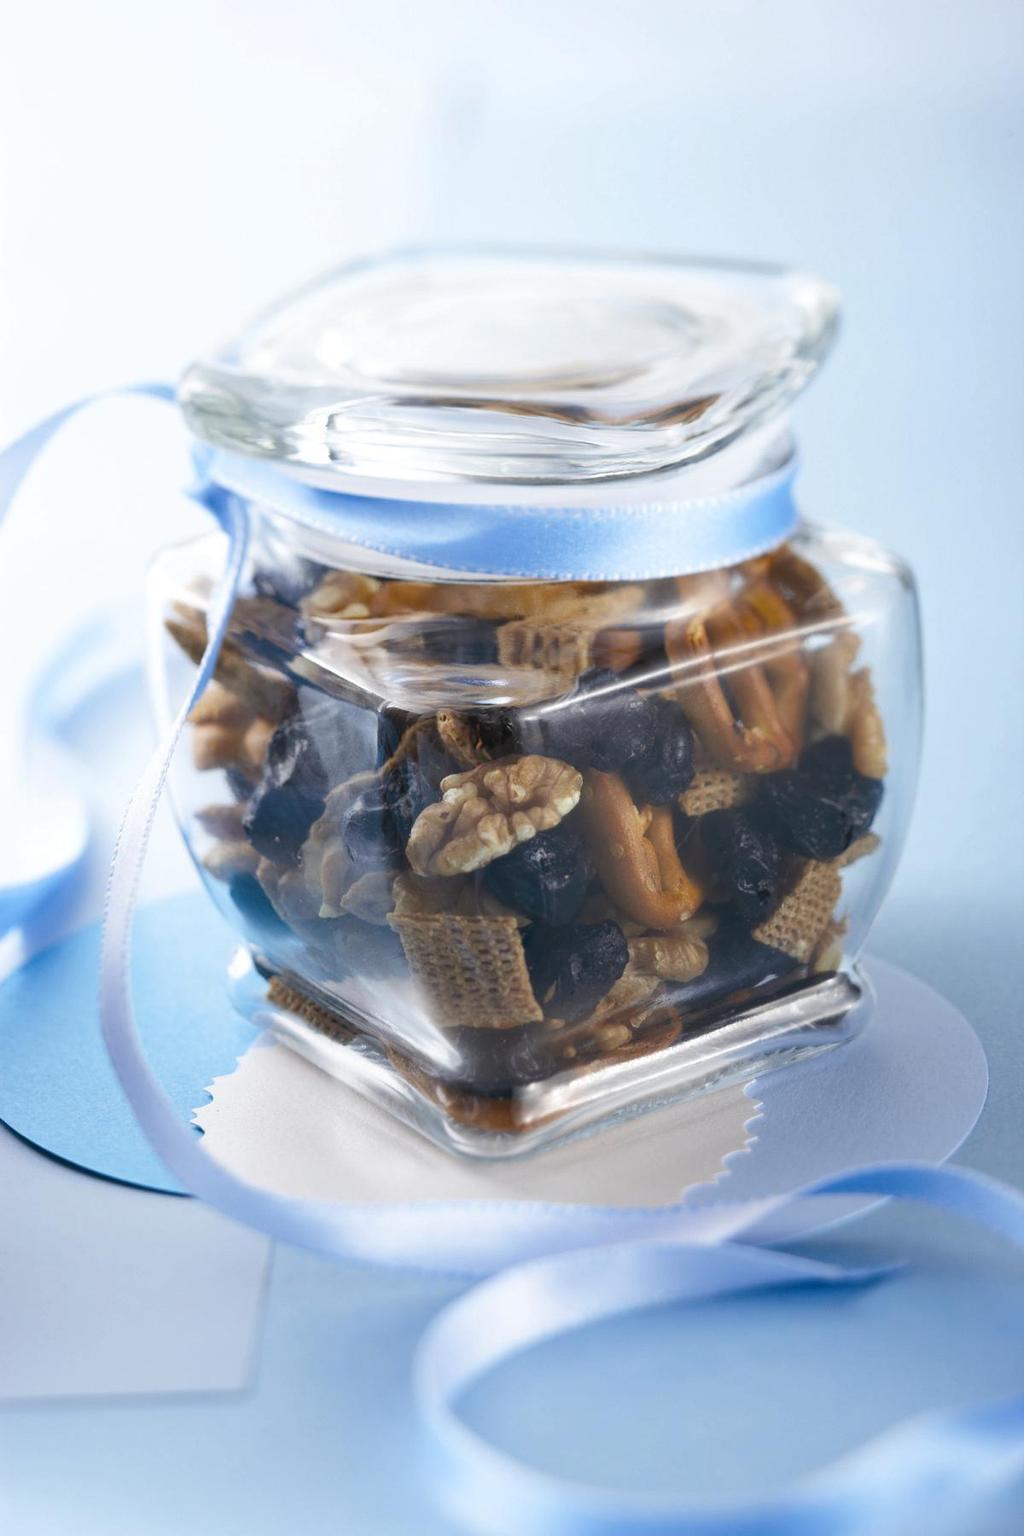 BLUEBERRY PARTY MIX 1 cup dried blueberries 1 cup coarsely chopped walnuts 1 cup thin pretzels, broken 1 cup ready-to-eat cereal (such as Wheat Chex,